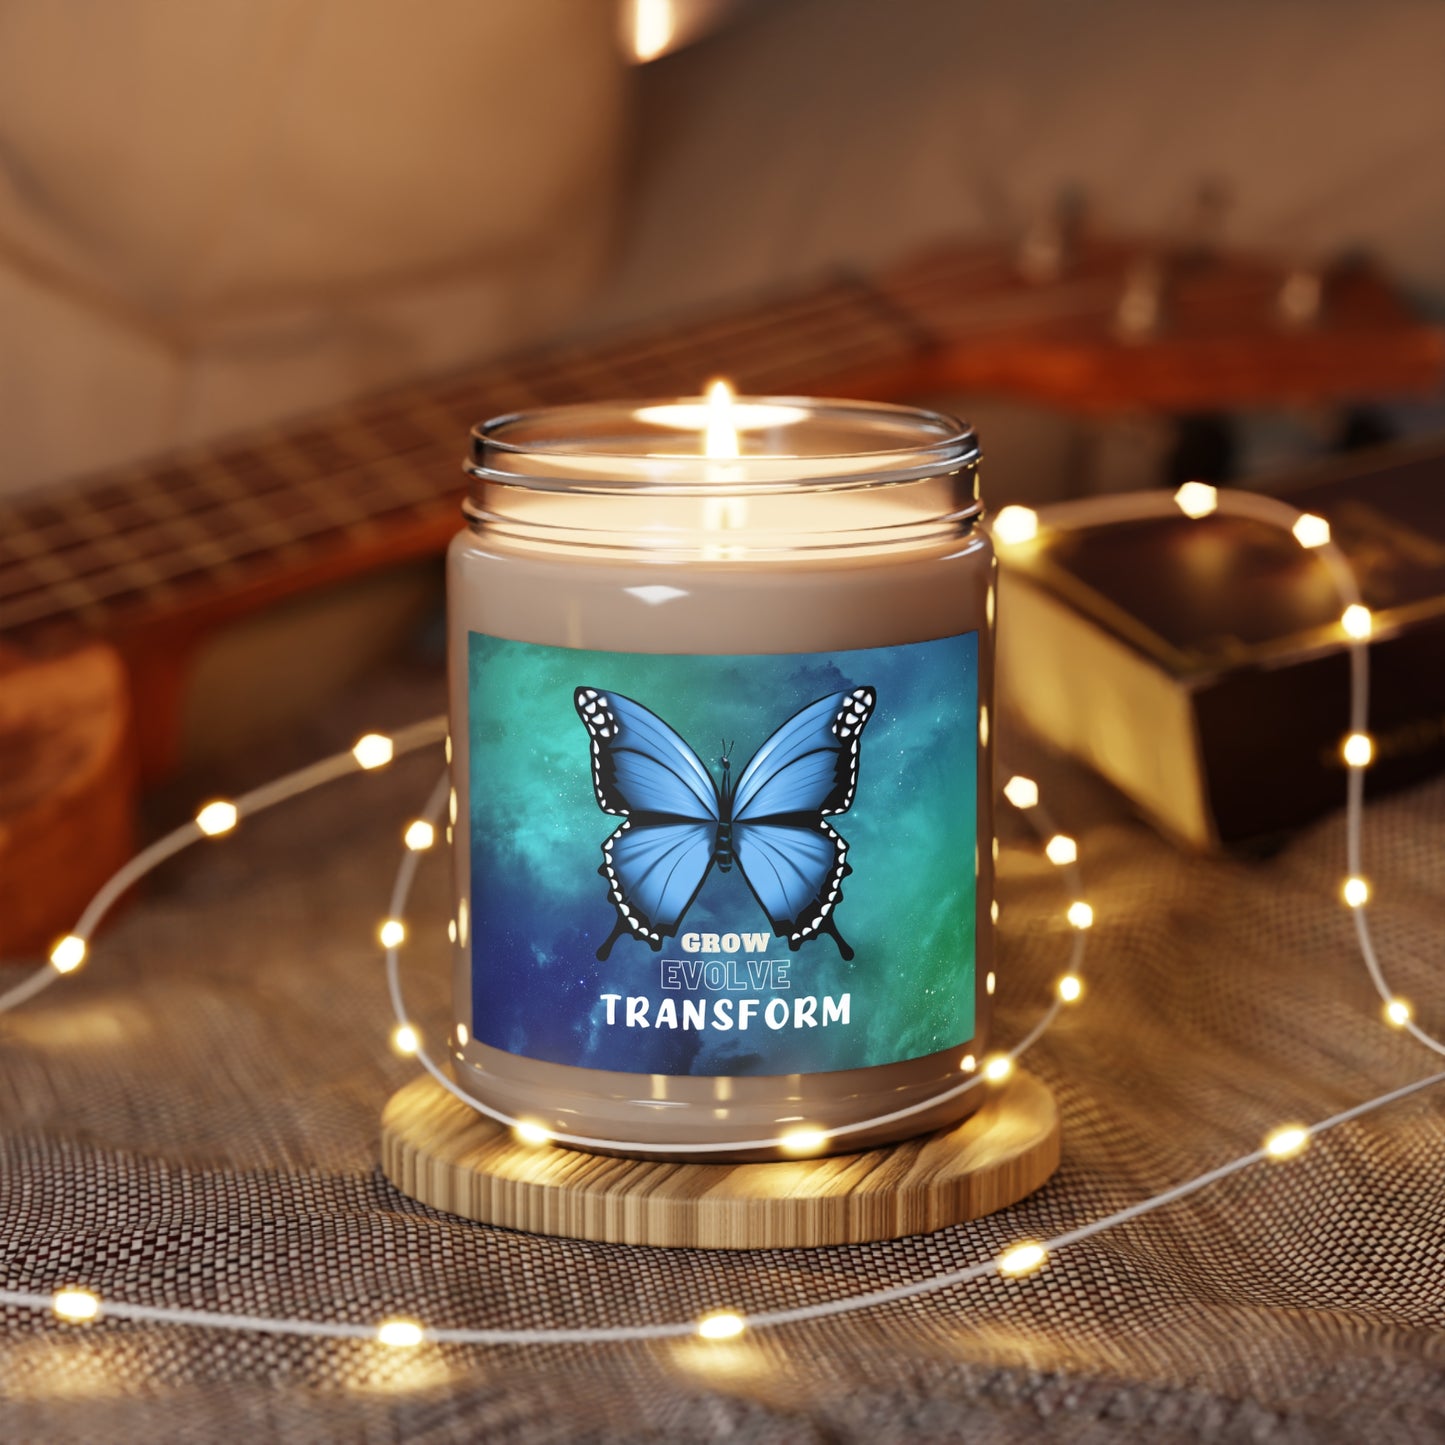 Grow Evolve Transform Butterfly Aromatherapy Candles, 9oz